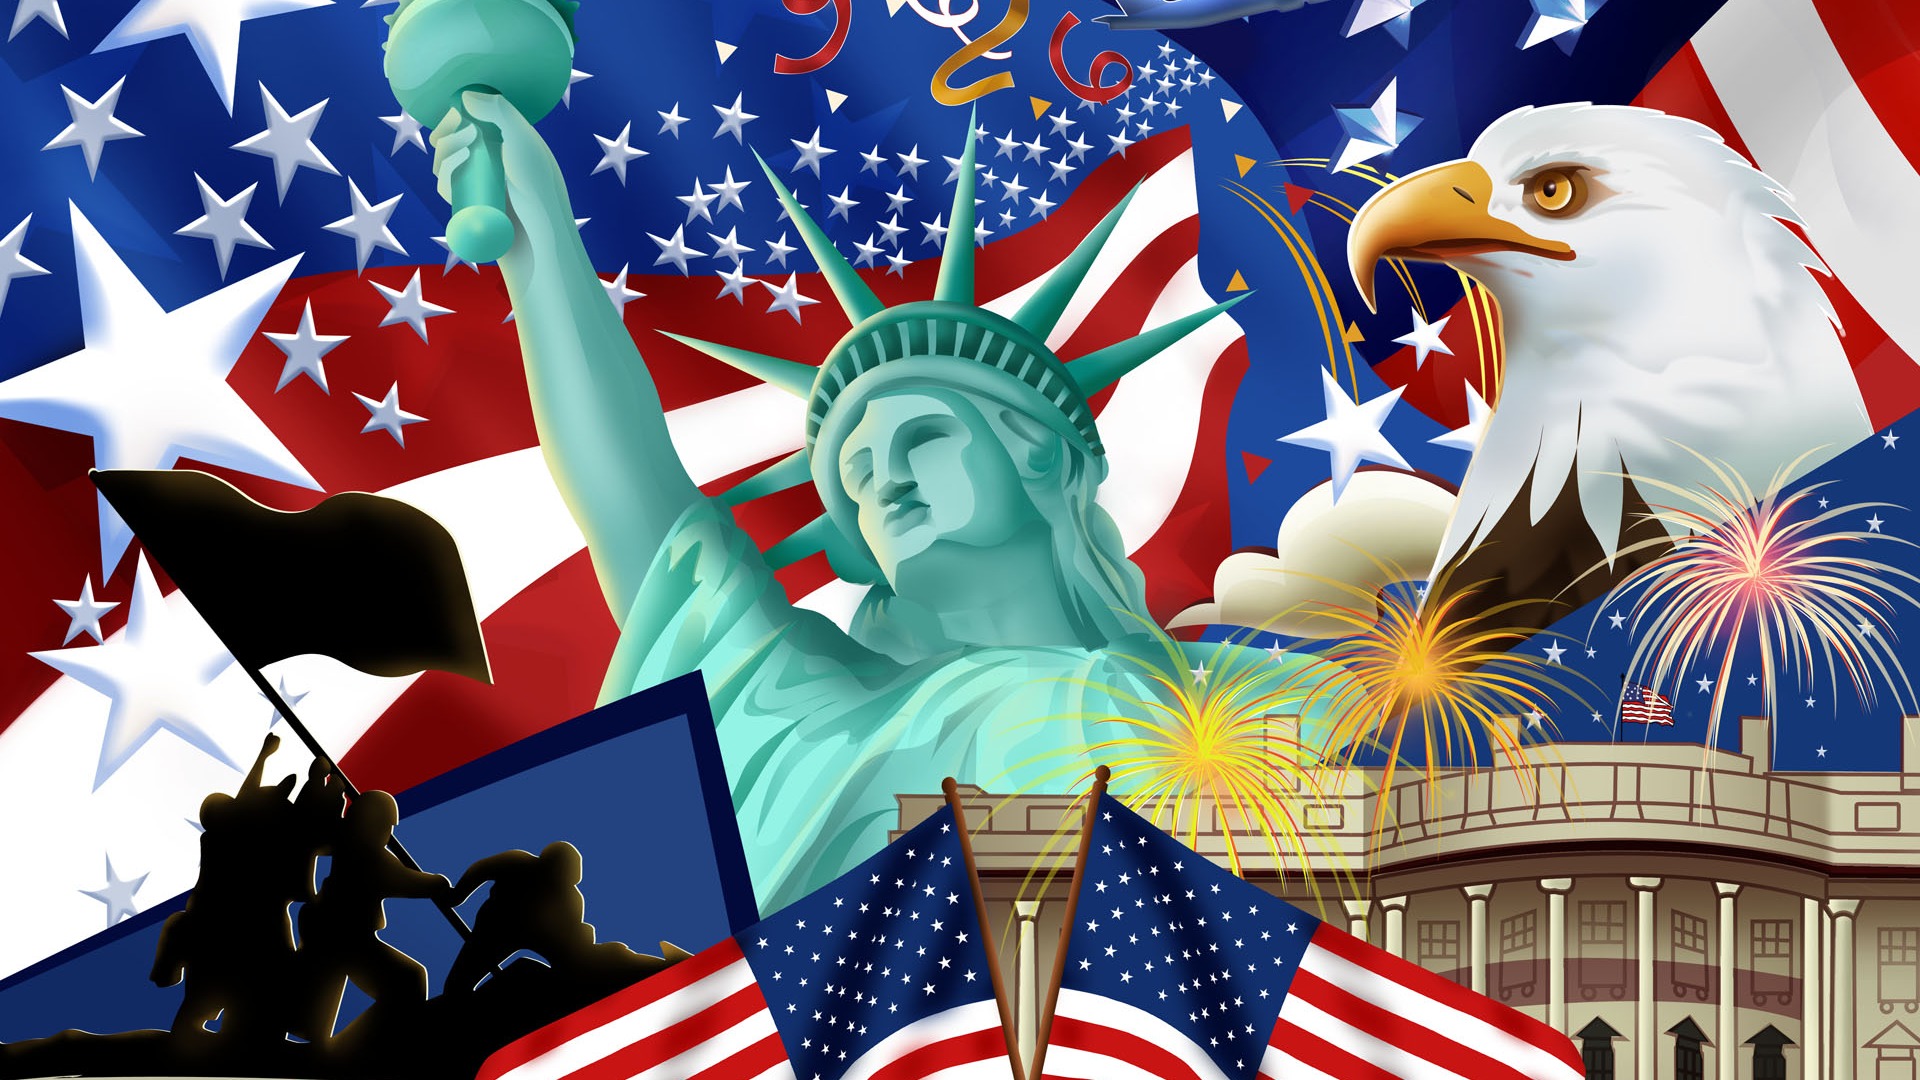 U.S. Independence Day theme wallpaper #14 - 1920x1080